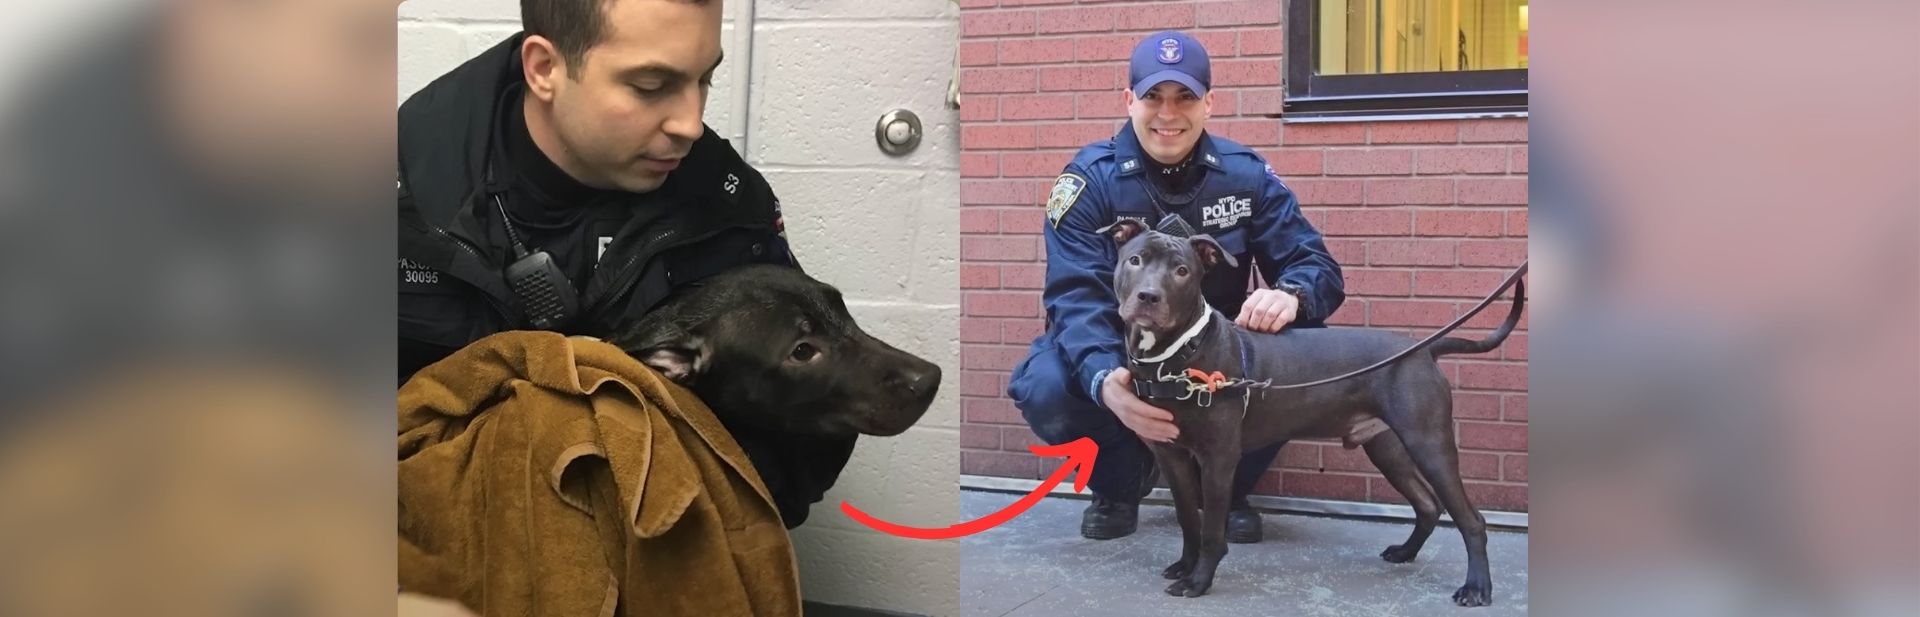 Frozen in A Brooklyn Park, Pit Bull’s Encounter with NYPD Officer Changes His Life